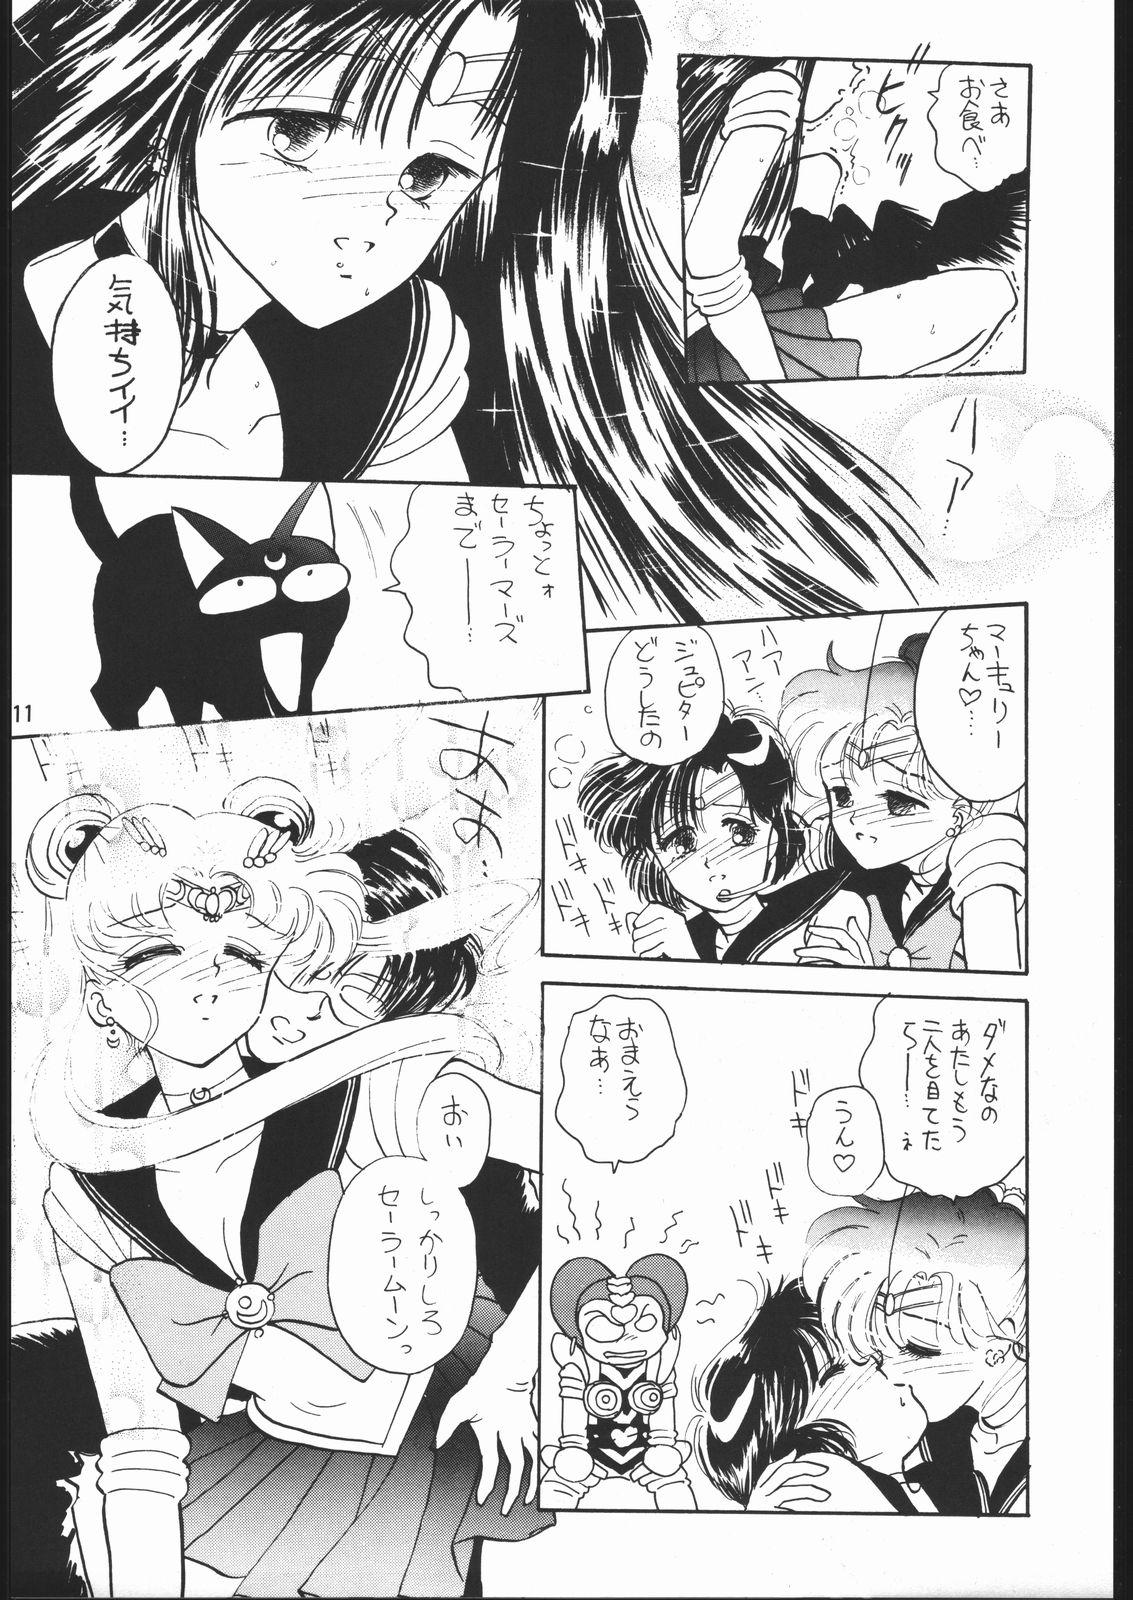 Anal Licking うさぎがピョン!! - Sailor moon Ohmibod - Page 10